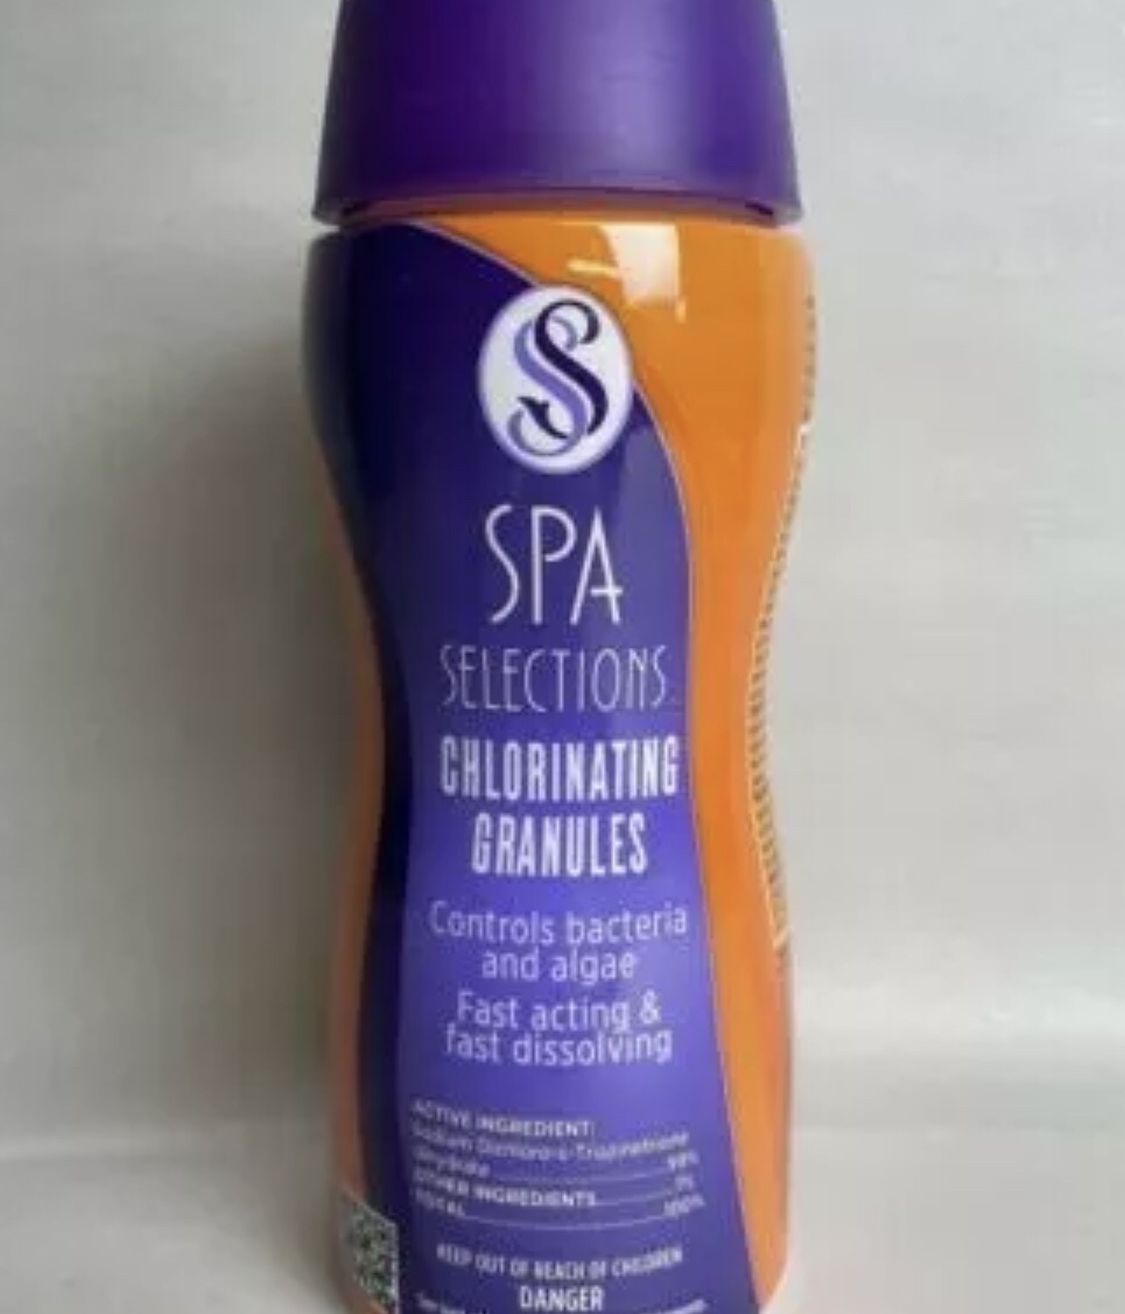 Spa Selections 86257 Chlorinating Granules Shock Treatment for Spas and Hot Tub